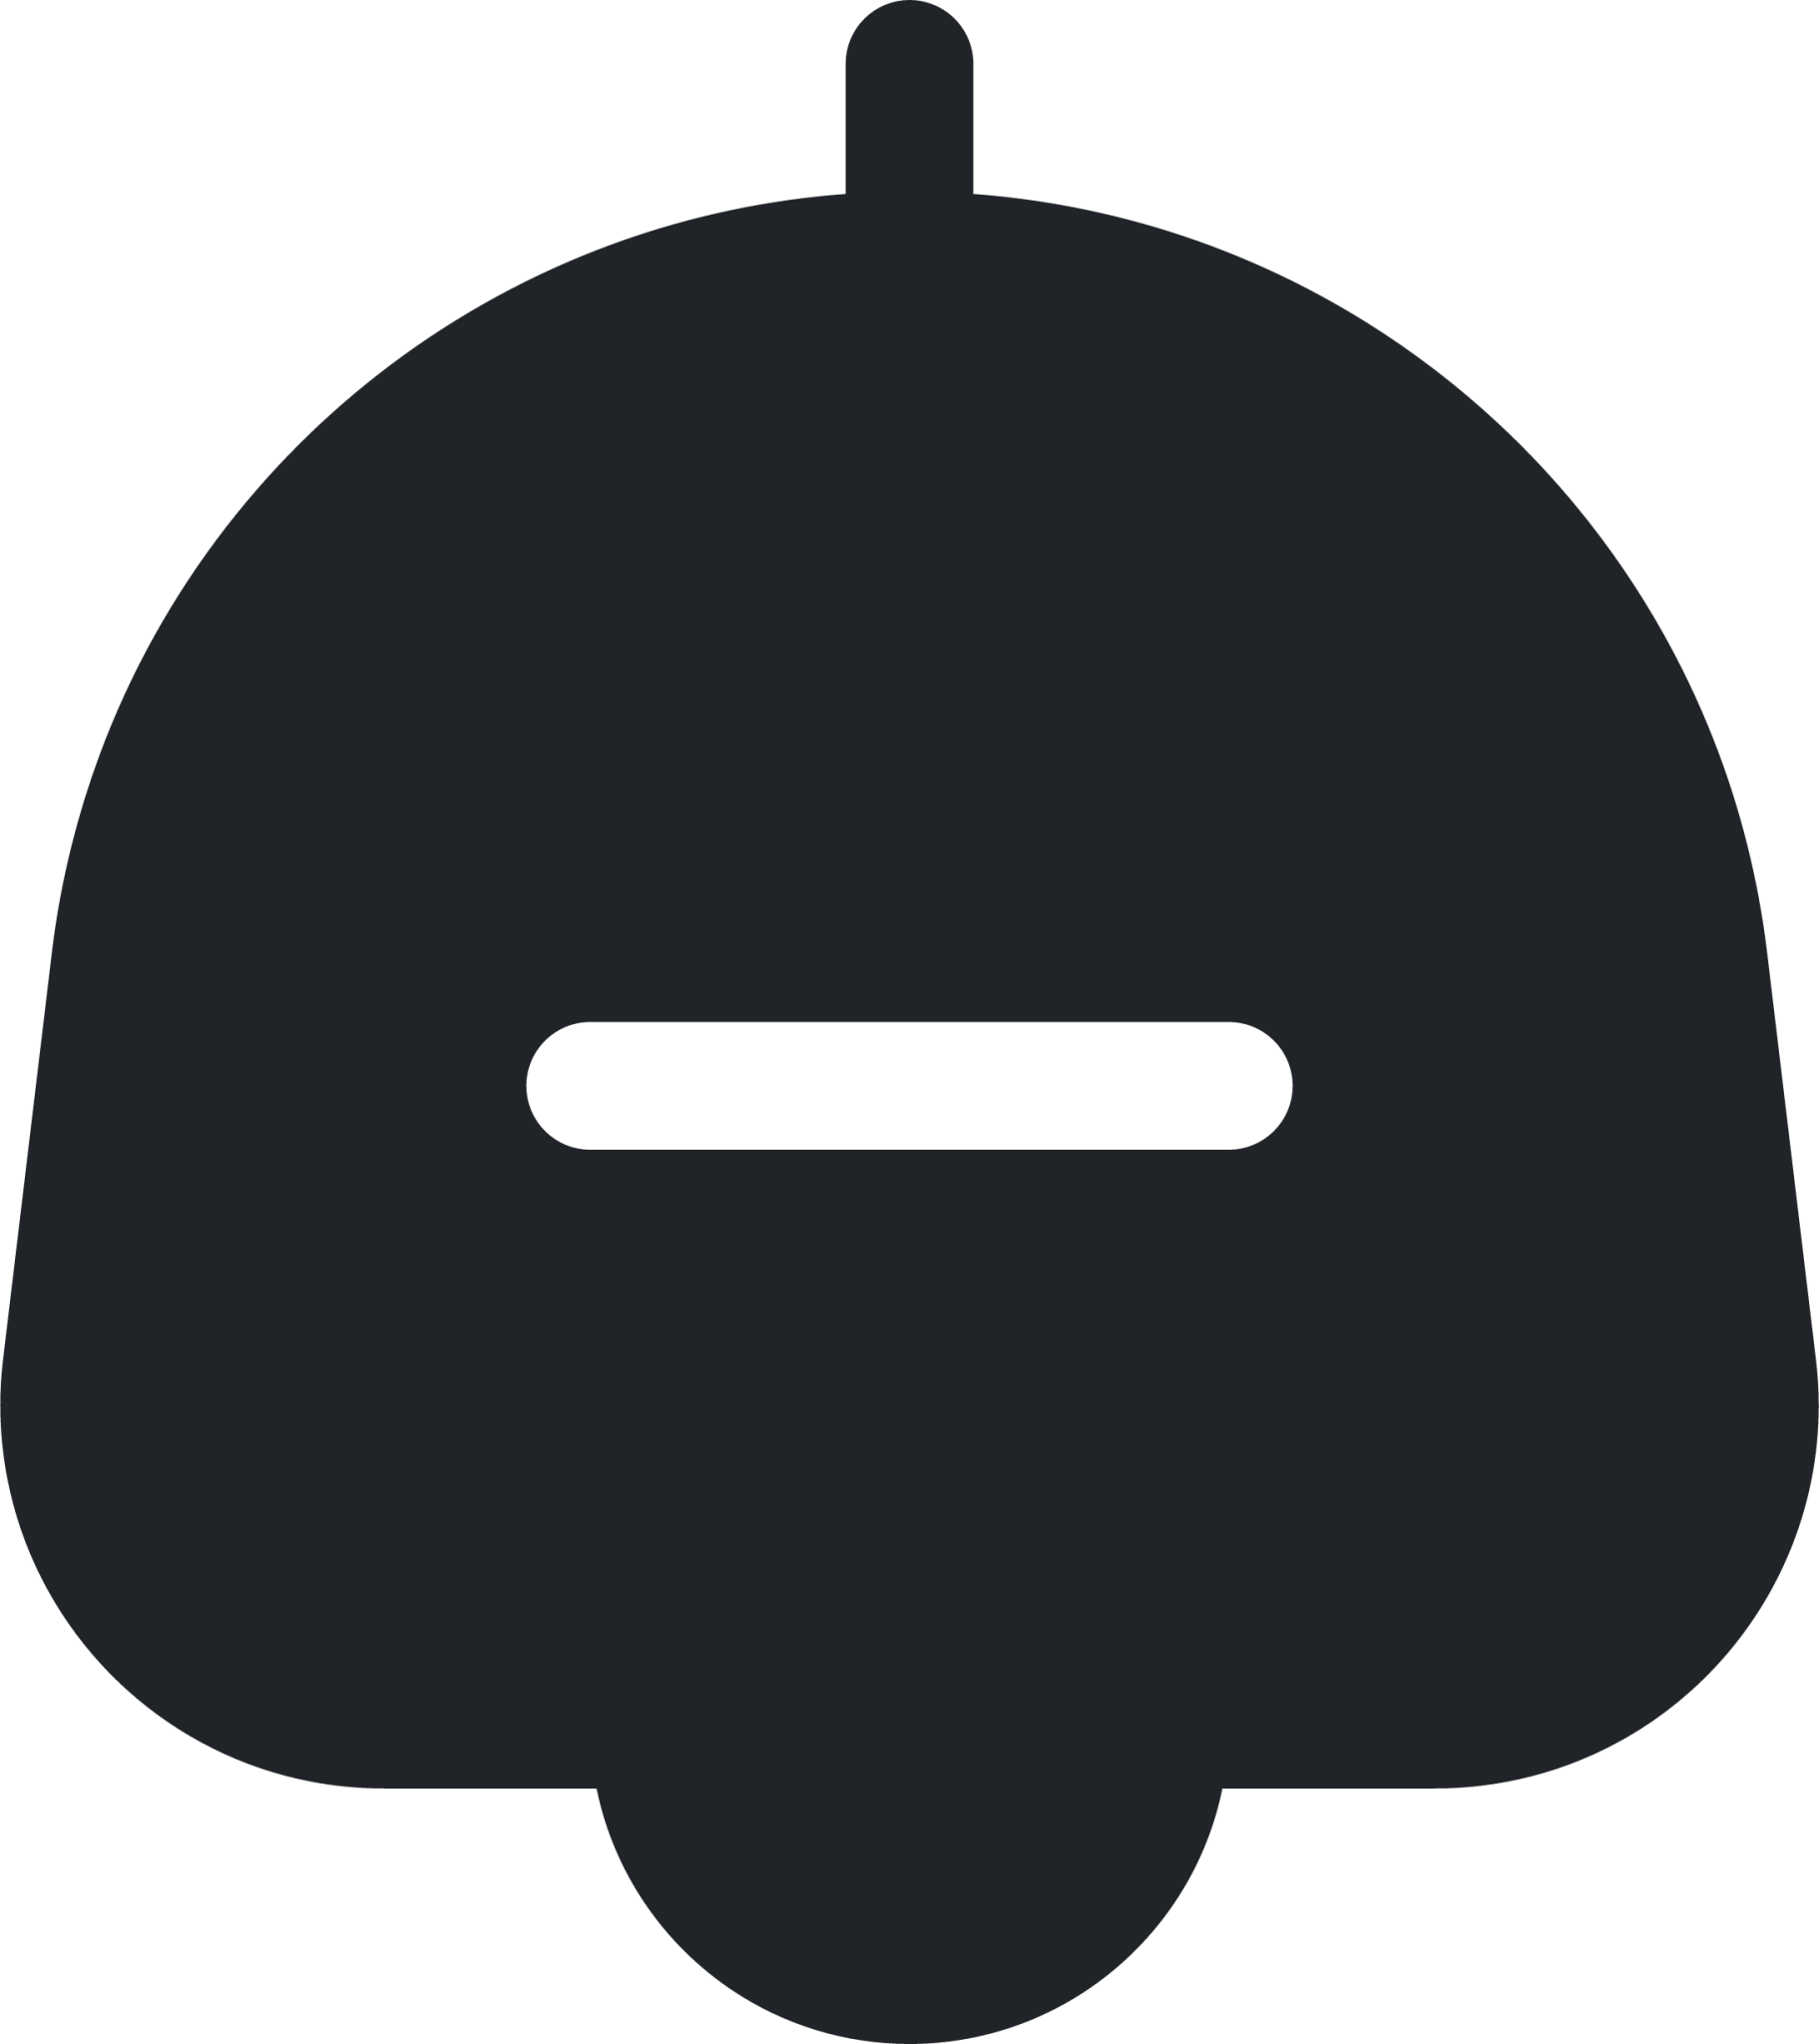 cbell (rounded filled) icon